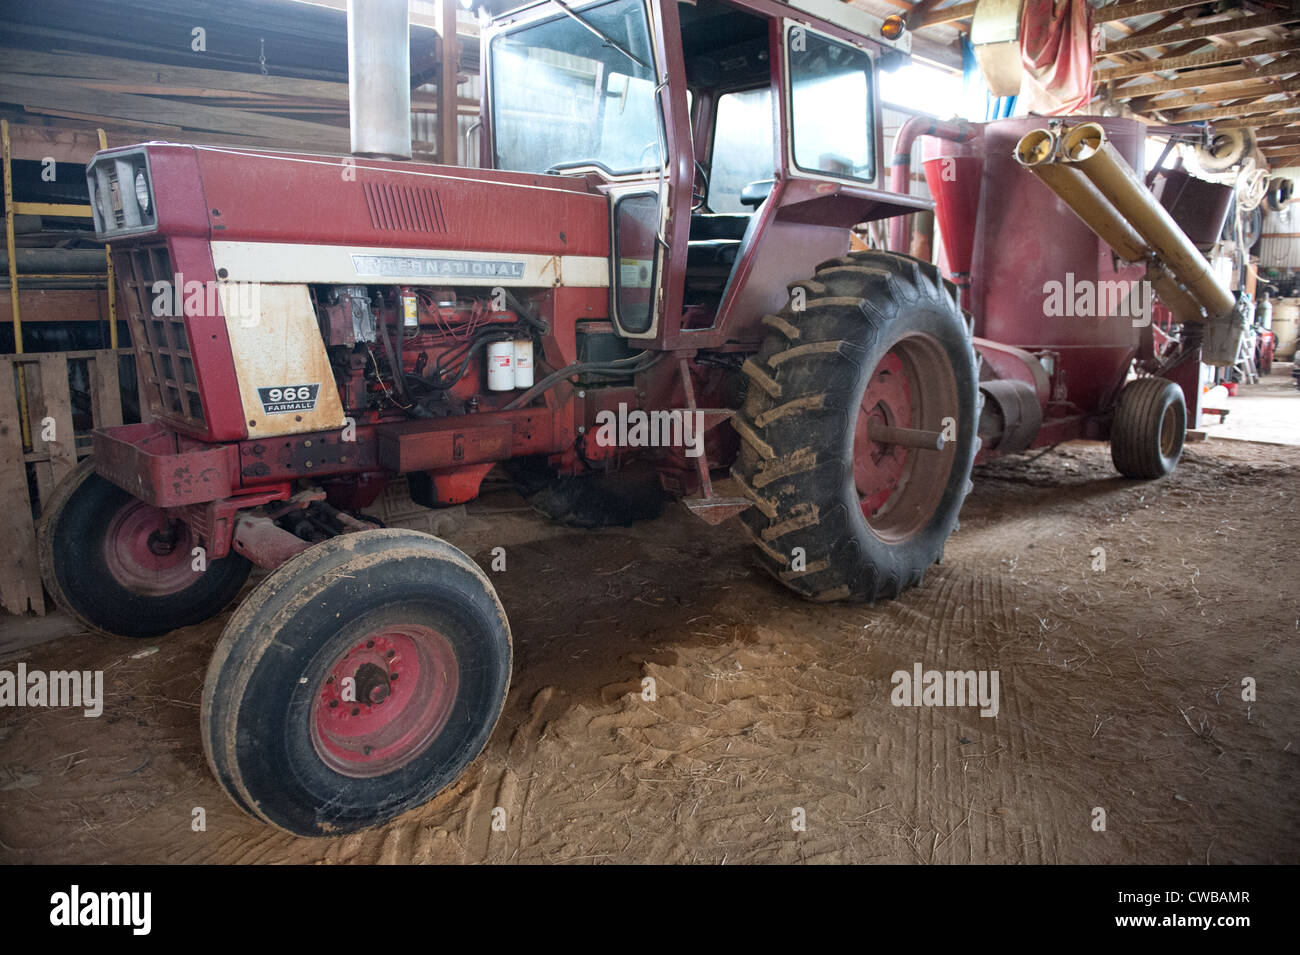 Antique tractor and machinery in barn on farm Stock Photo